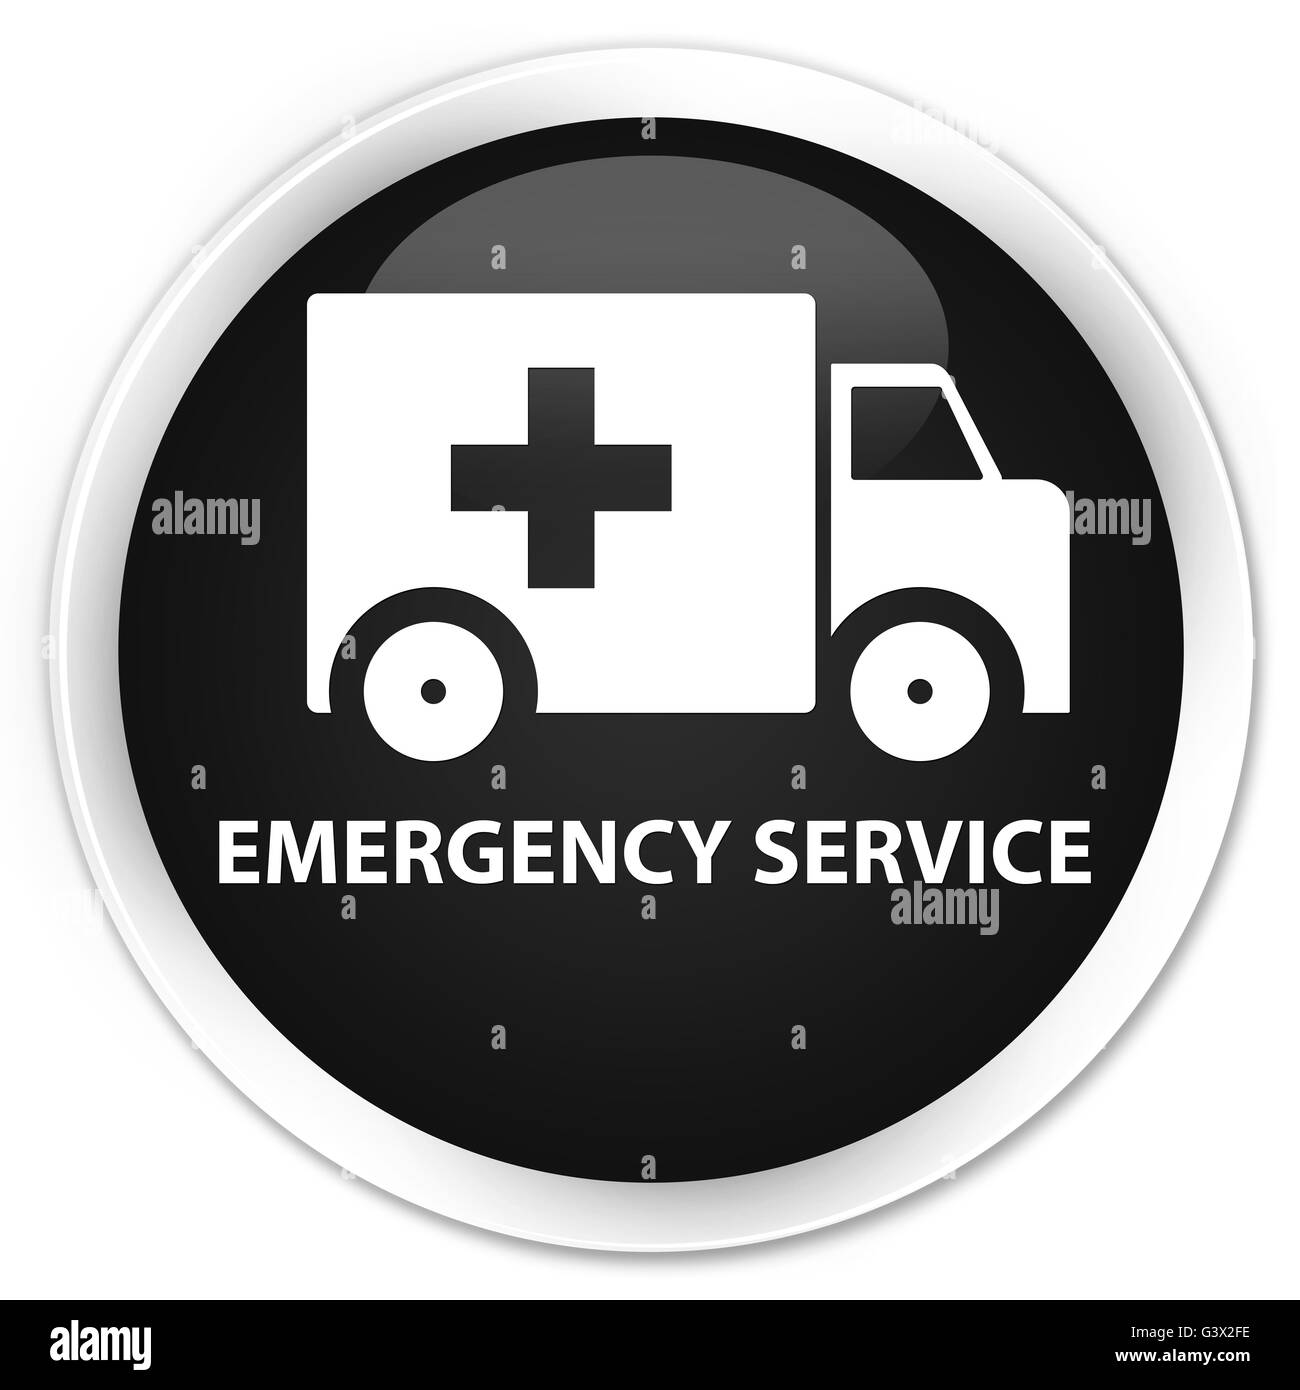 Emergency service isolated on premium black round button abstract illustration Stock Photo